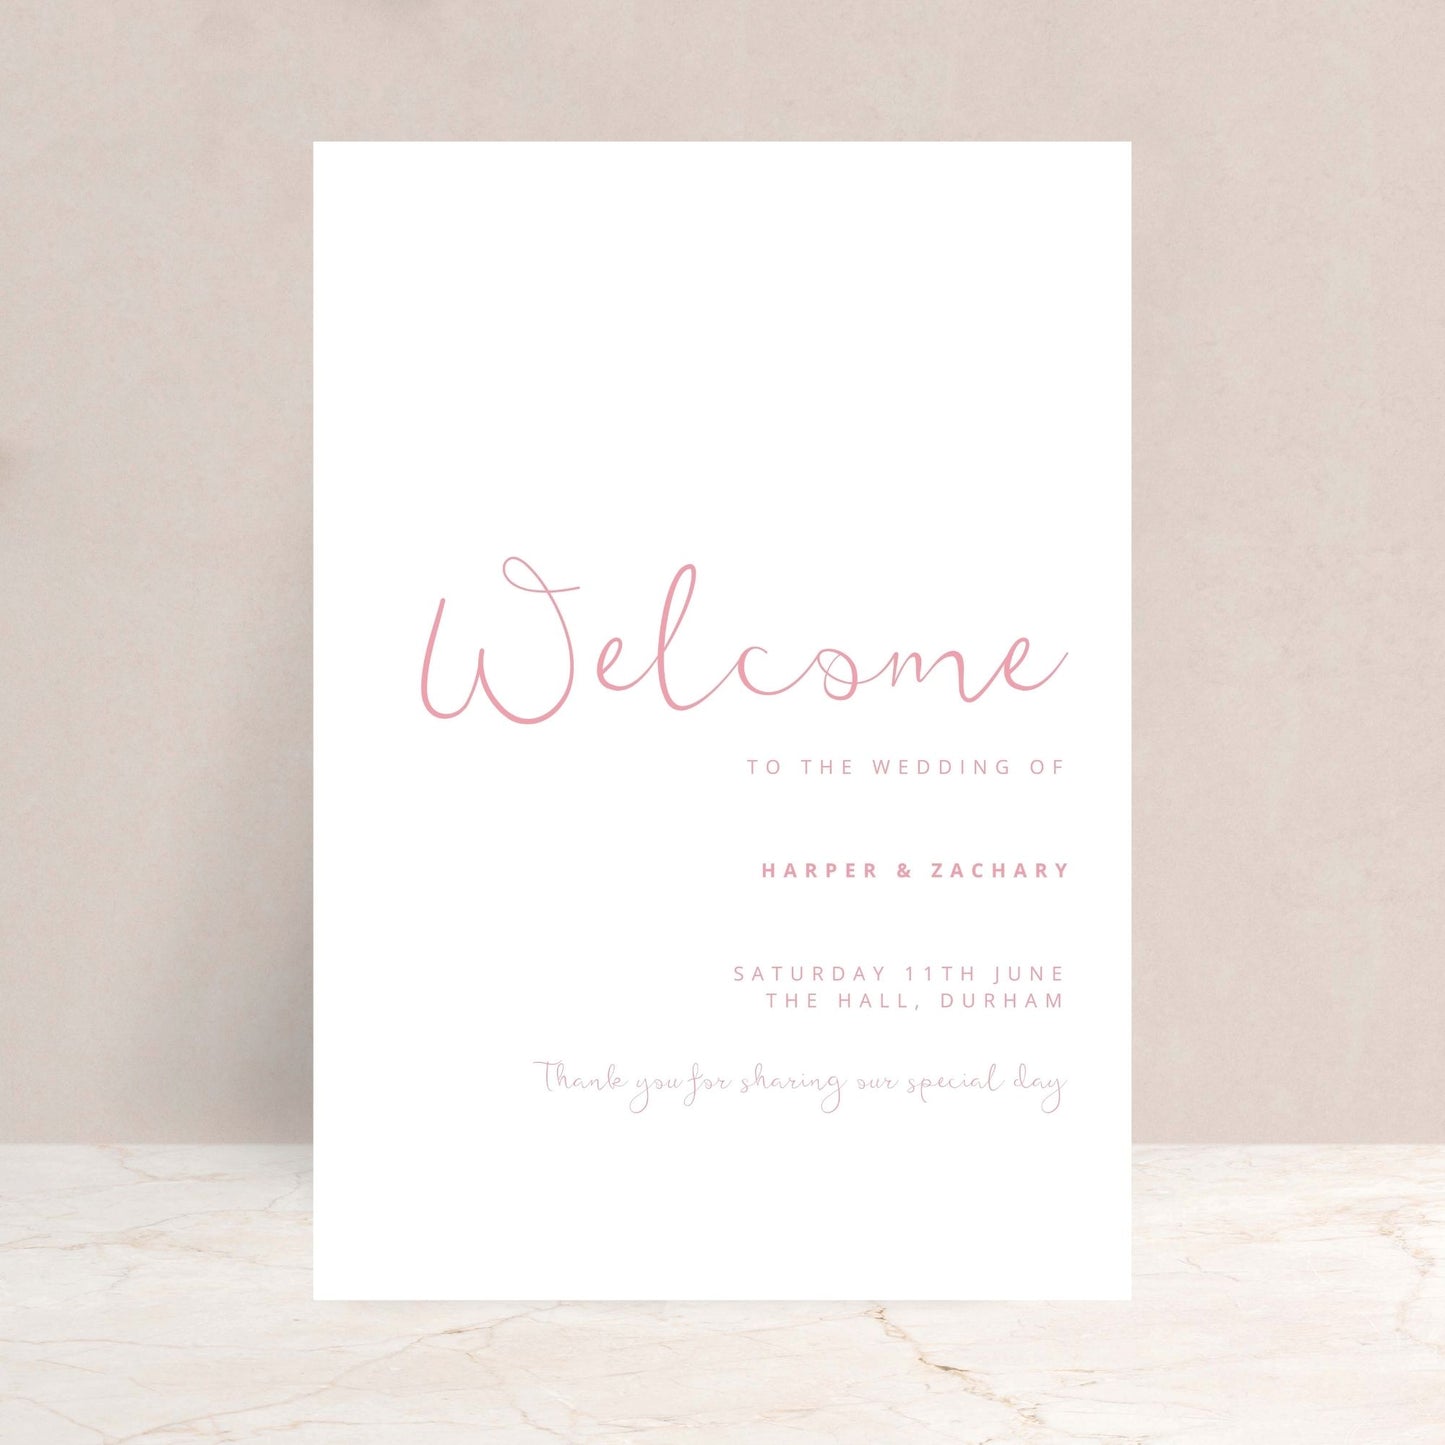 HARPER Minimal Wedding Welcome Sign - Wedding Ceremony Stationery available at The Ivy Collection | Luxury Wedding Stationery